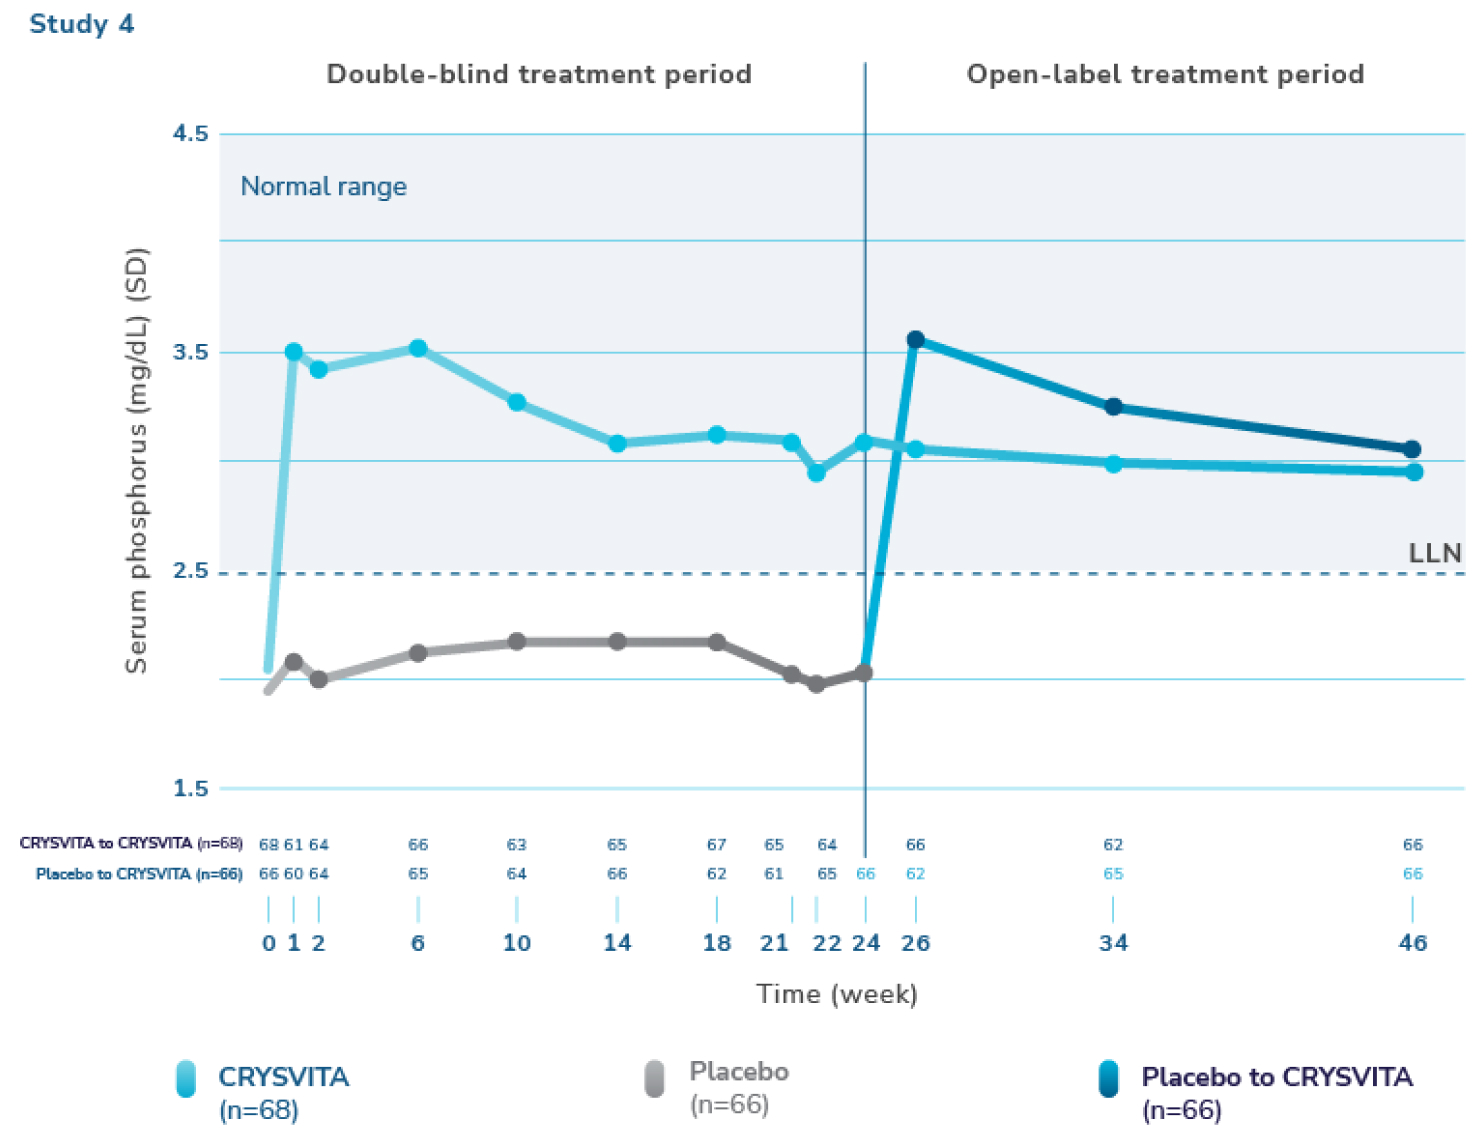 Line graph of mean serum phosphorus levels in both periods of Study 4; CRYSVITA increased serum phosphorus levels within the normal range within 2 weeks; patients switching from placebo to CRYSVITA during the open-label treatment period also increased serum phosphorus levels within the normal range